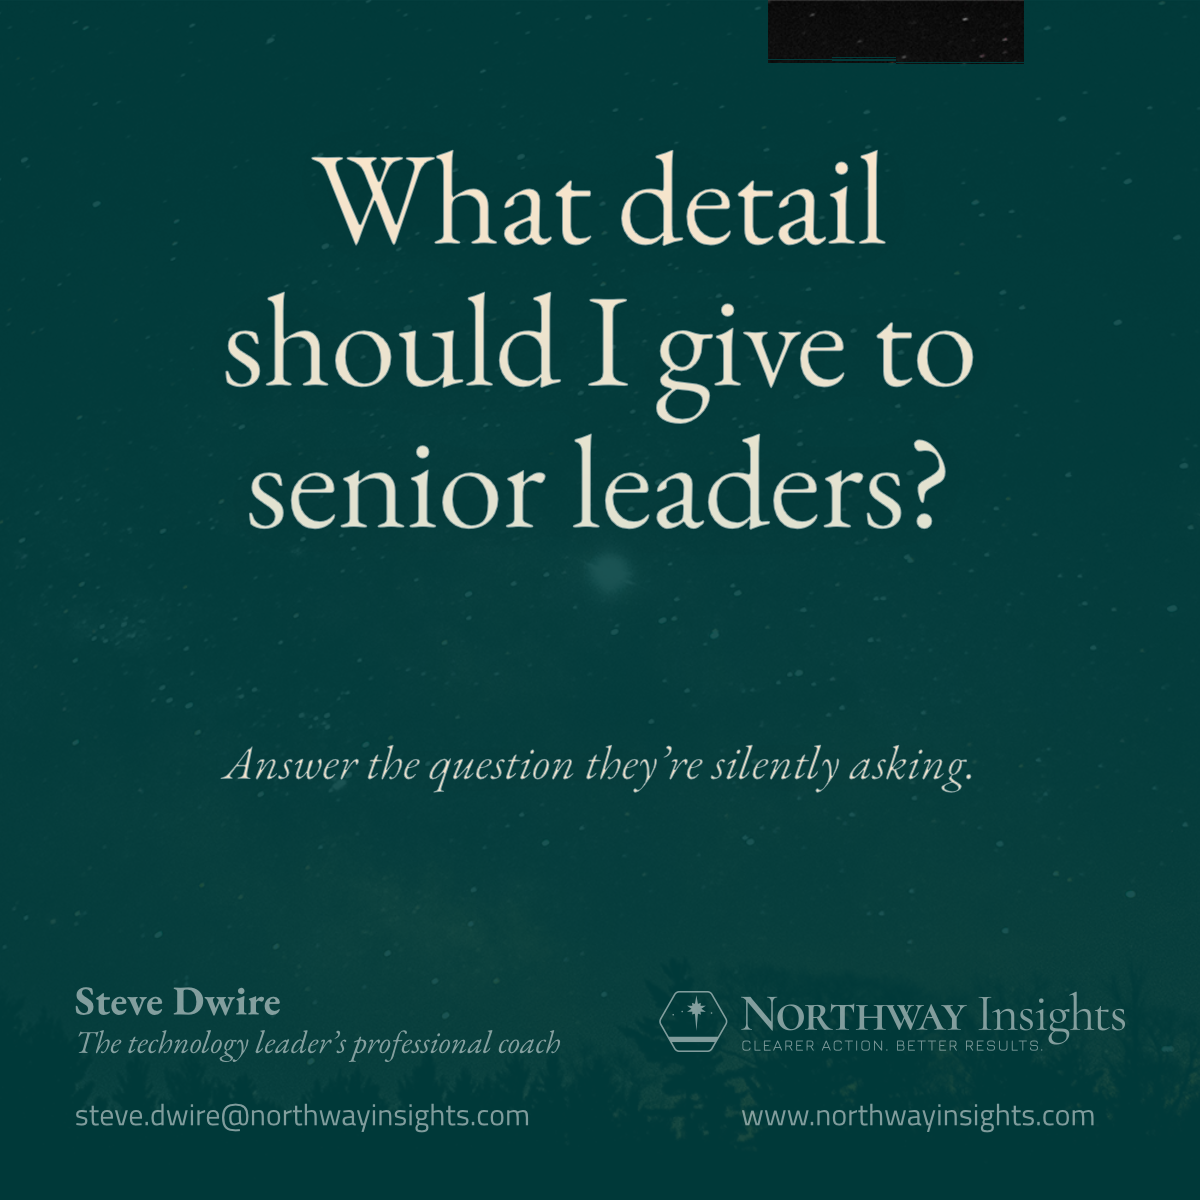 What detail should I give to senior leaders? (Answer the questions they're silently asking.)